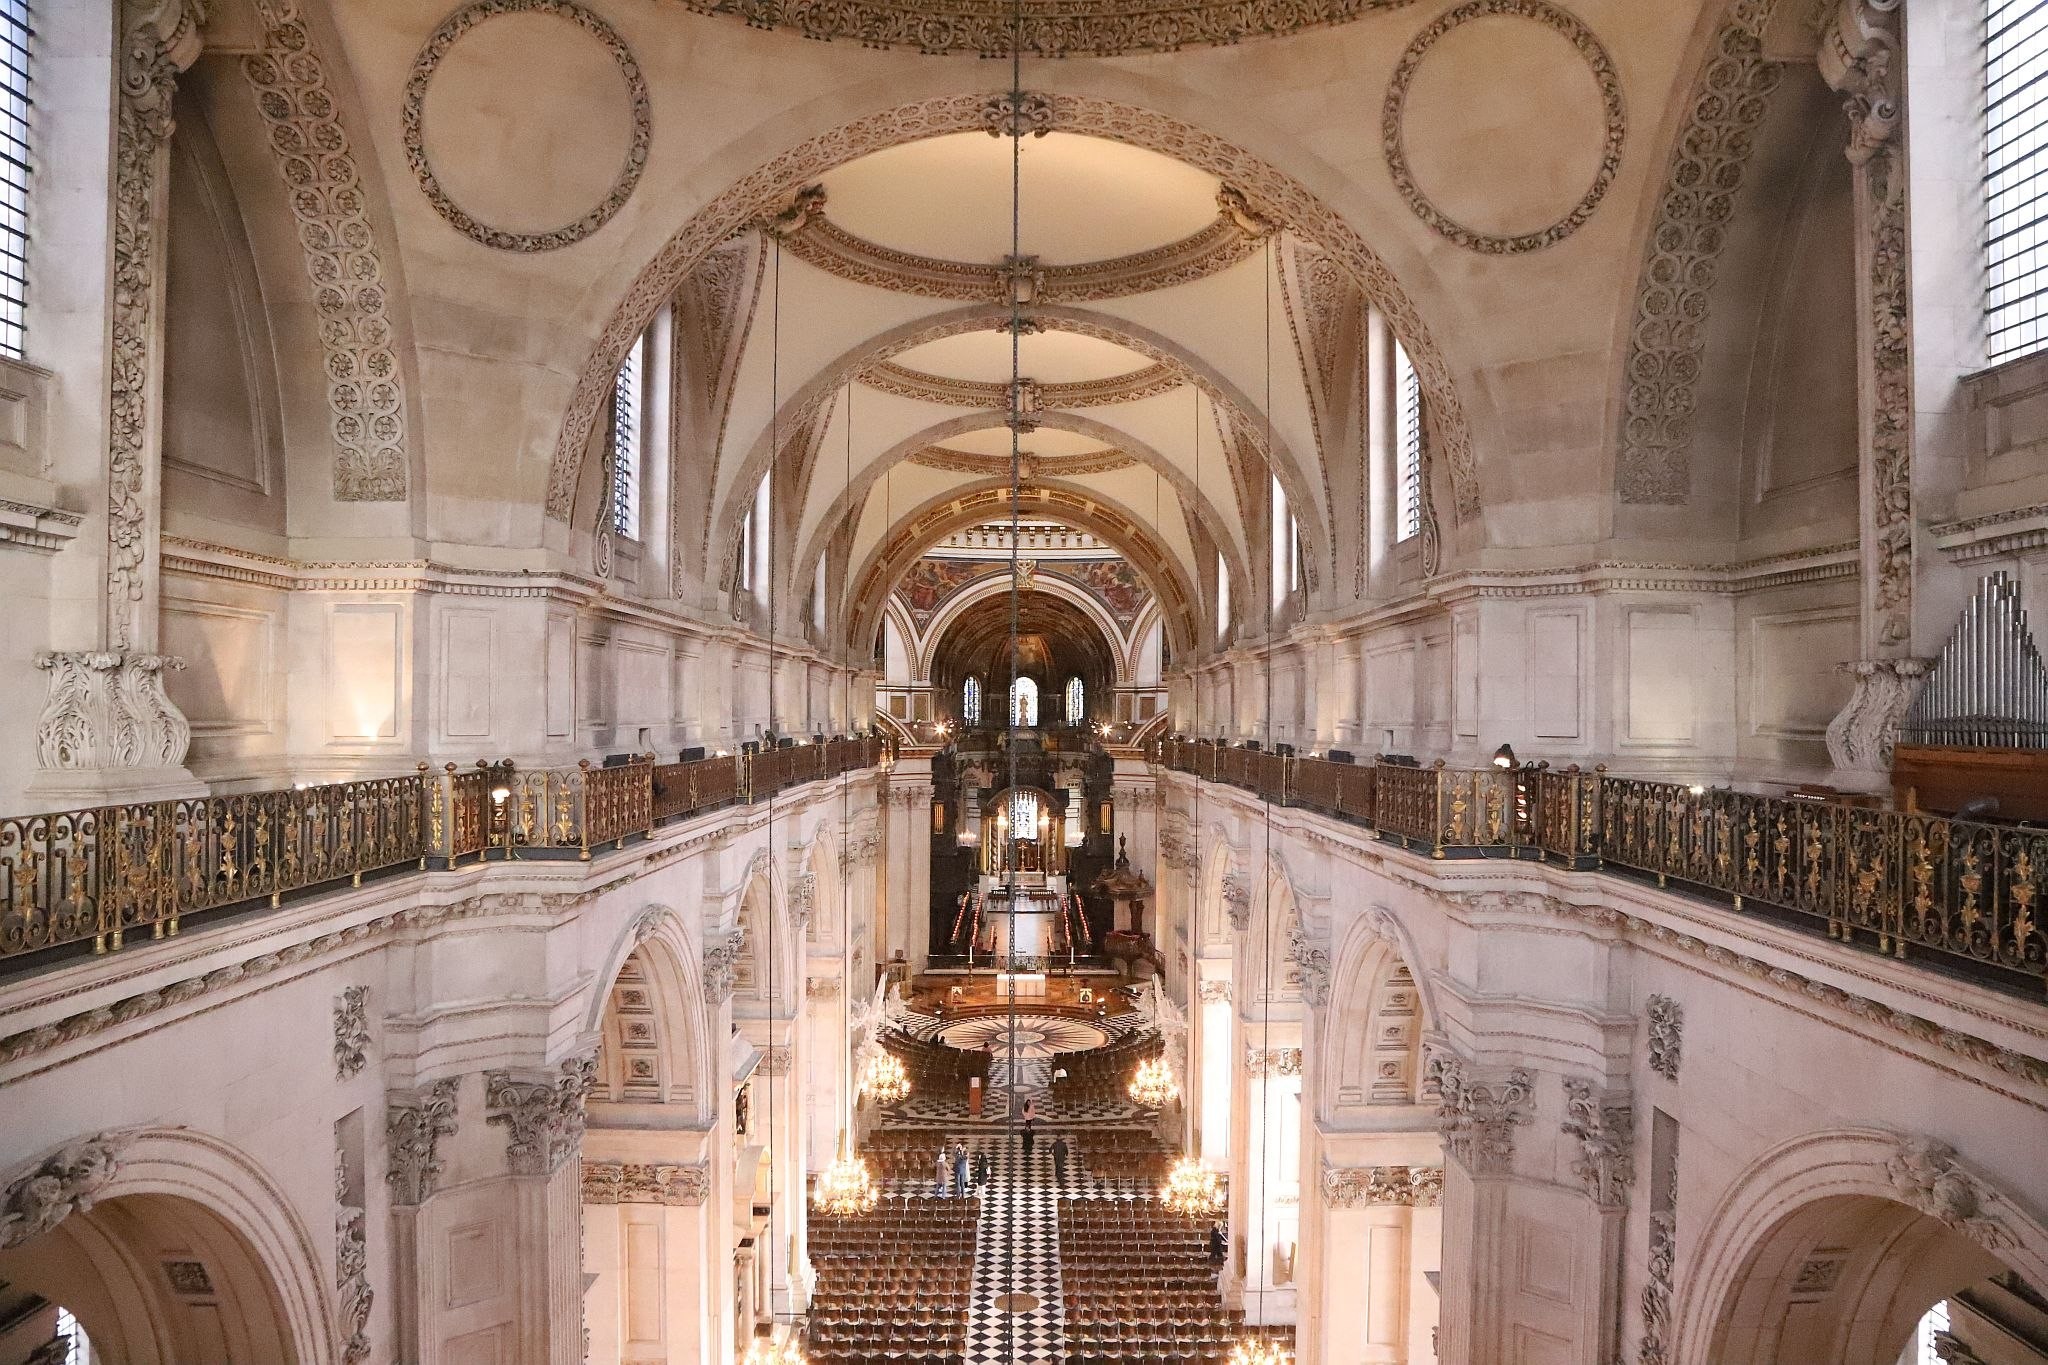 View down the nave from the balcony above the Great West Doors. St. Paul's Cathedral Triforium Tour, 09-Jan-2023. London.